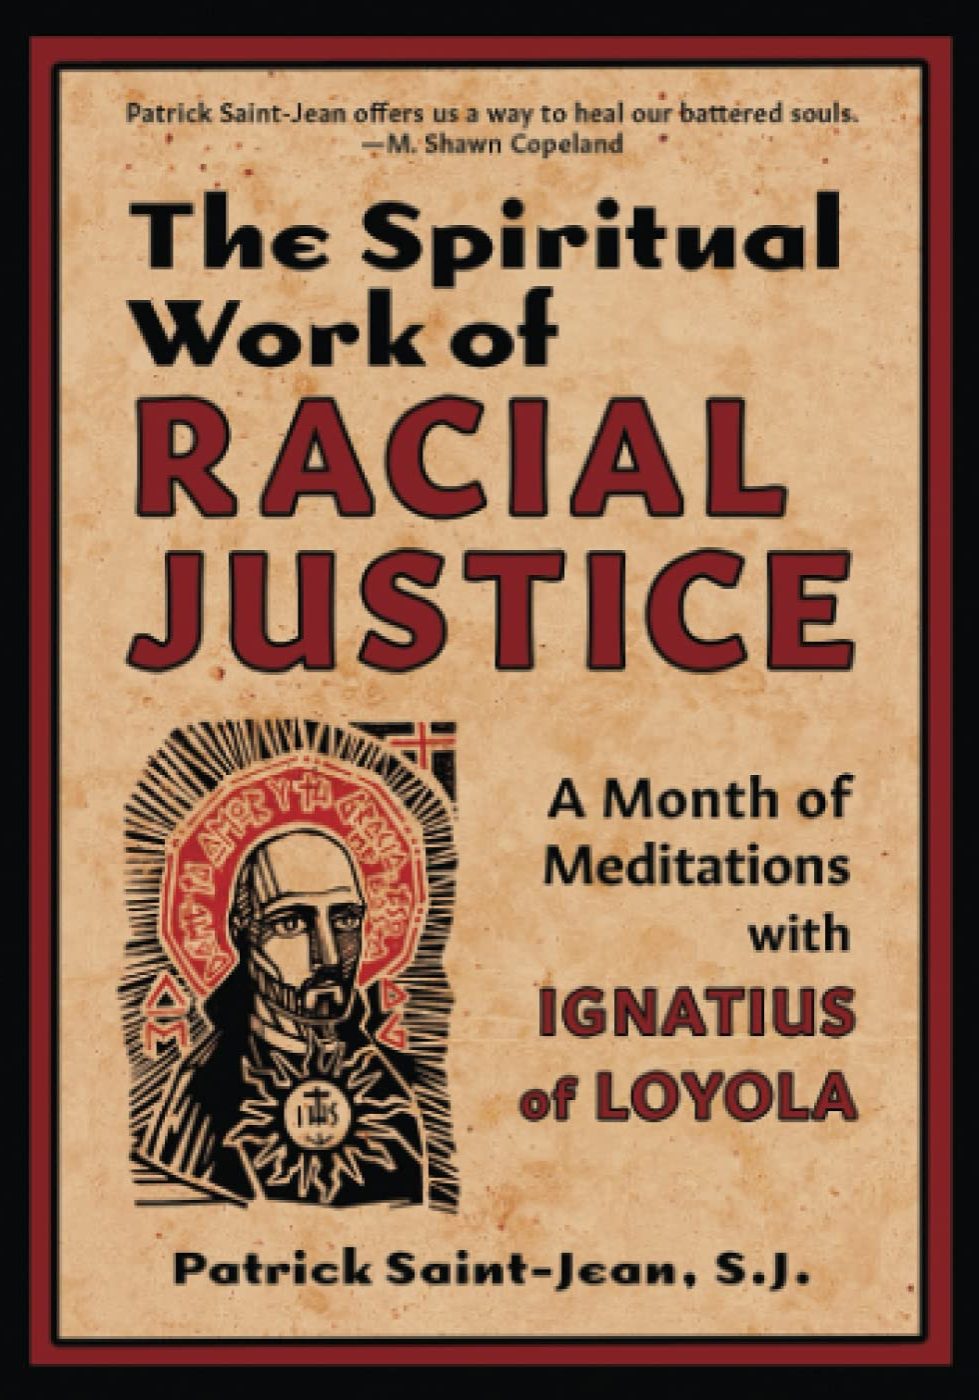 Cover of the book 'The Spiritual Work of Racial Justice'